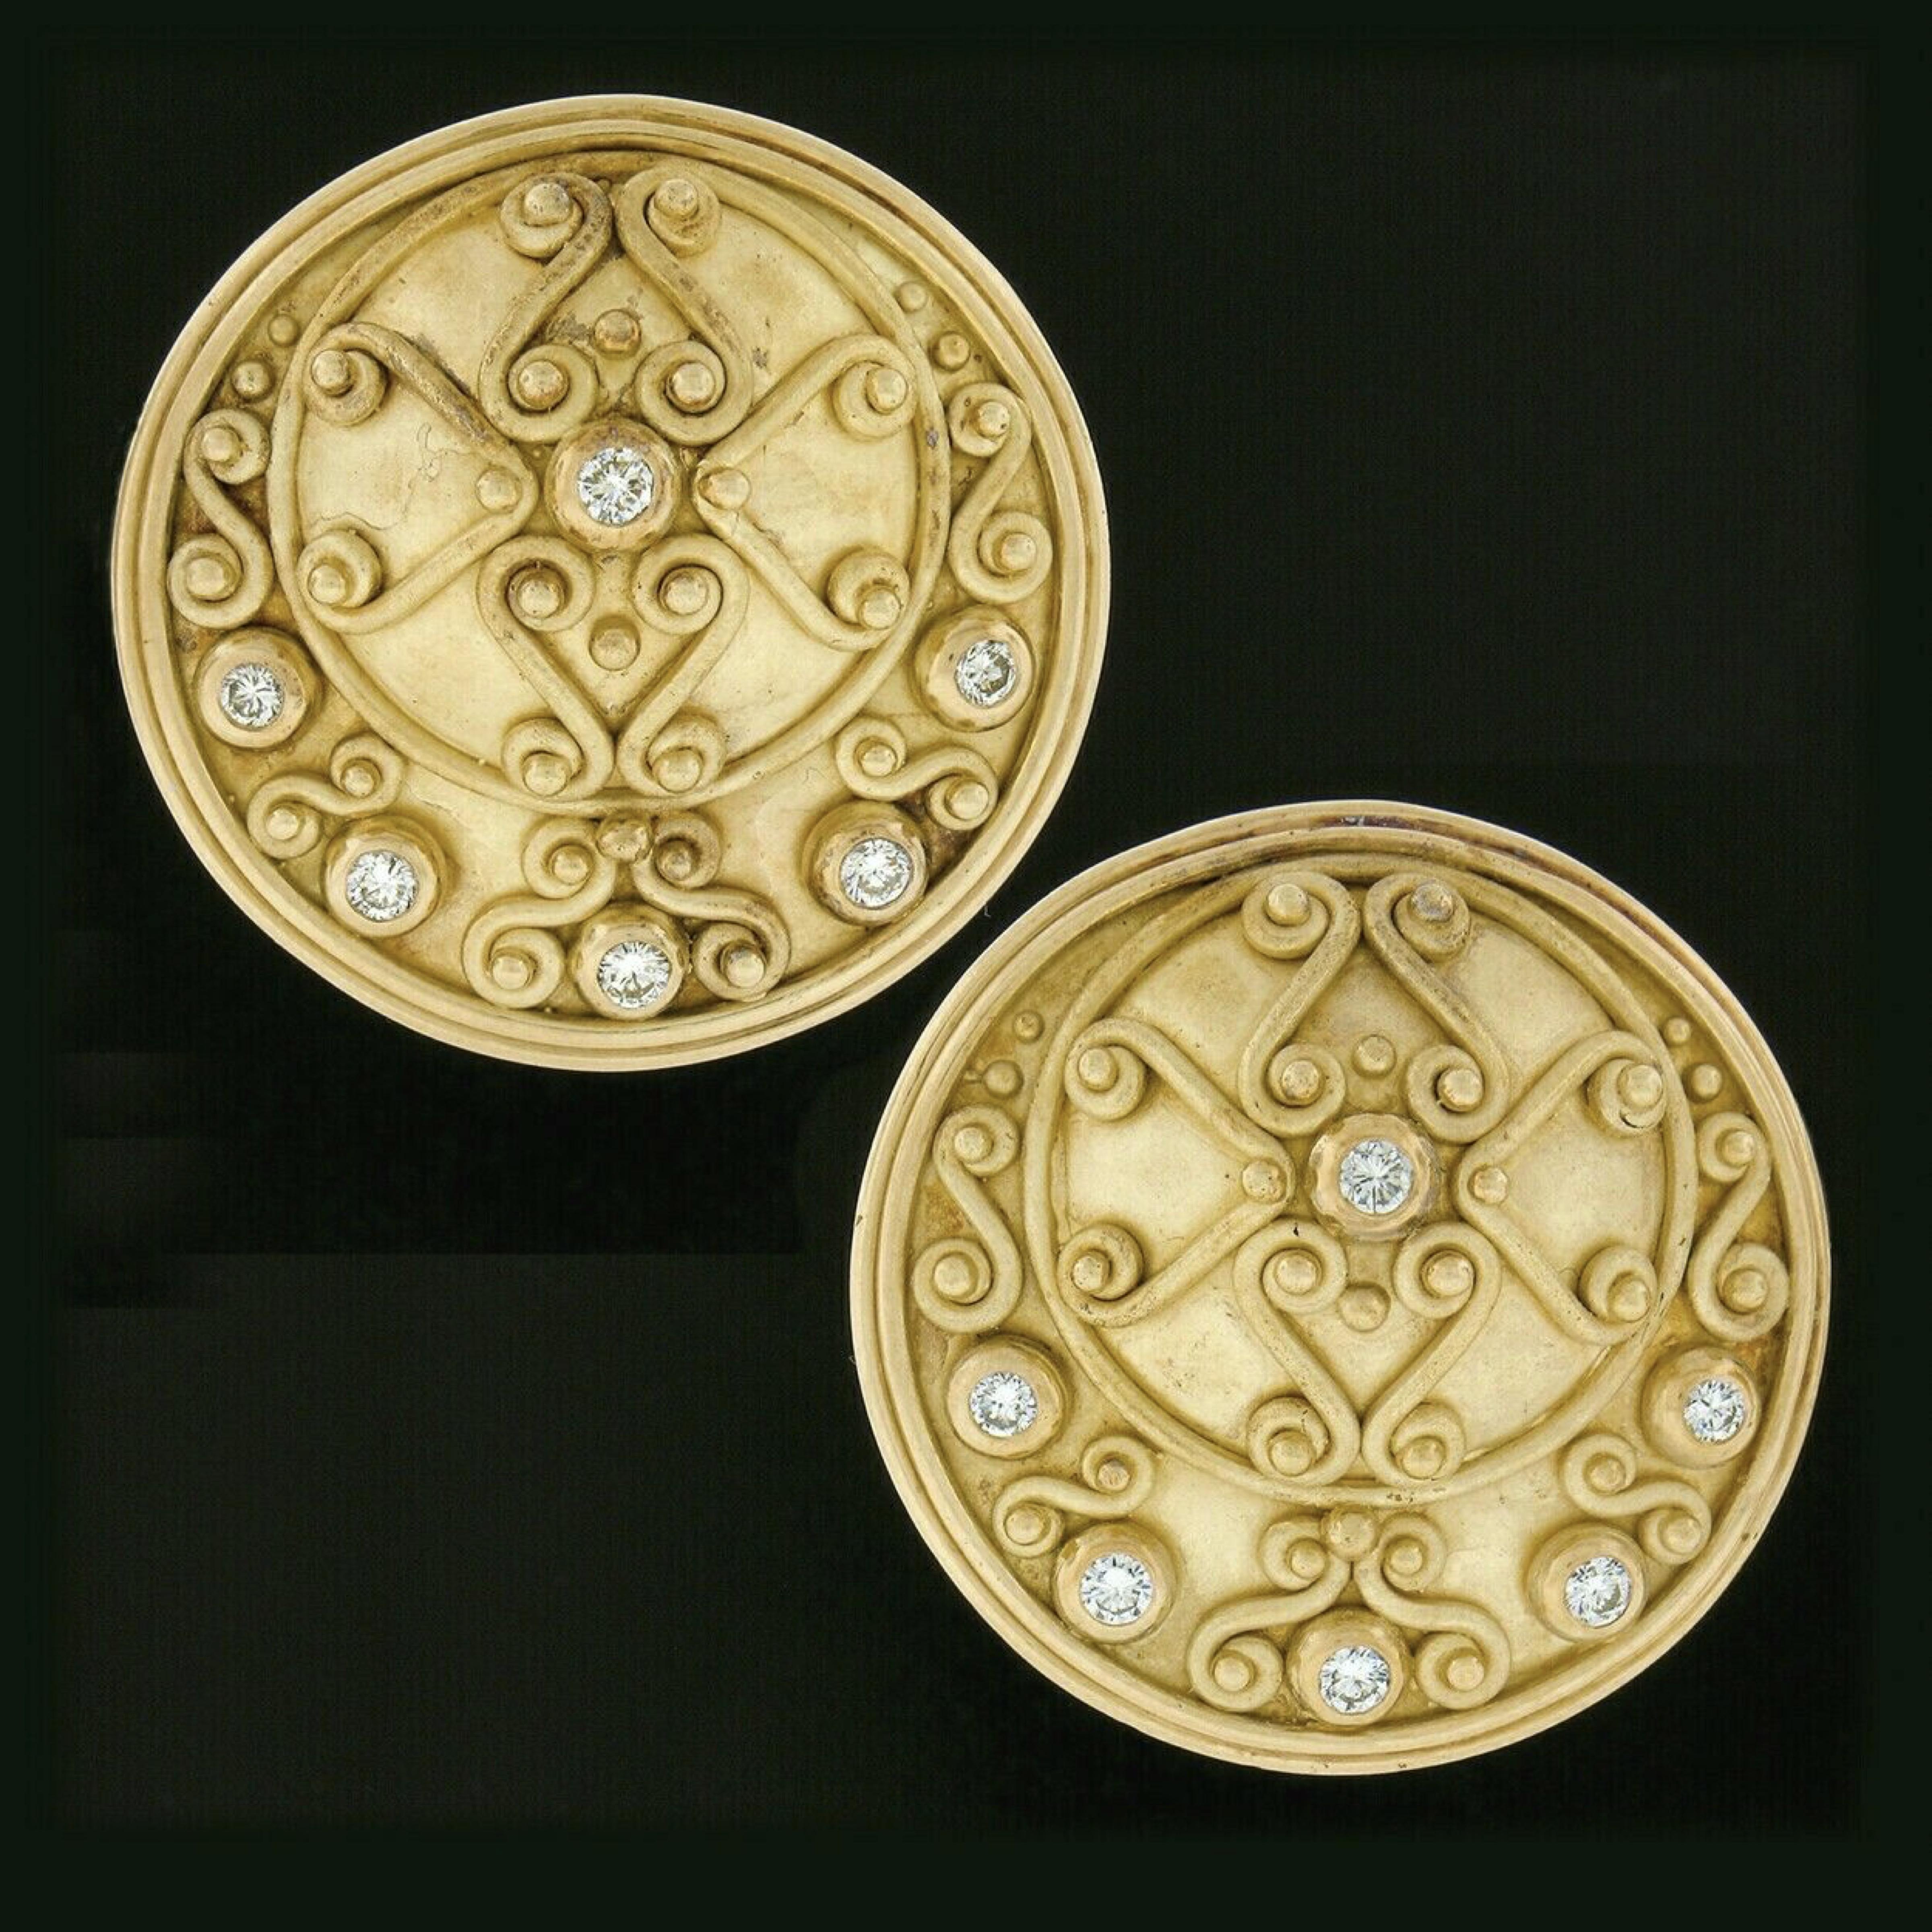 Here we have a gorgeous pair of statement earrings designed by Denise Roberge and crafted in solid 18k yellow gold. They feature a large round disc with a slightly domed area, all of which is elegantly decorated with gold work in a lovely Etruscan